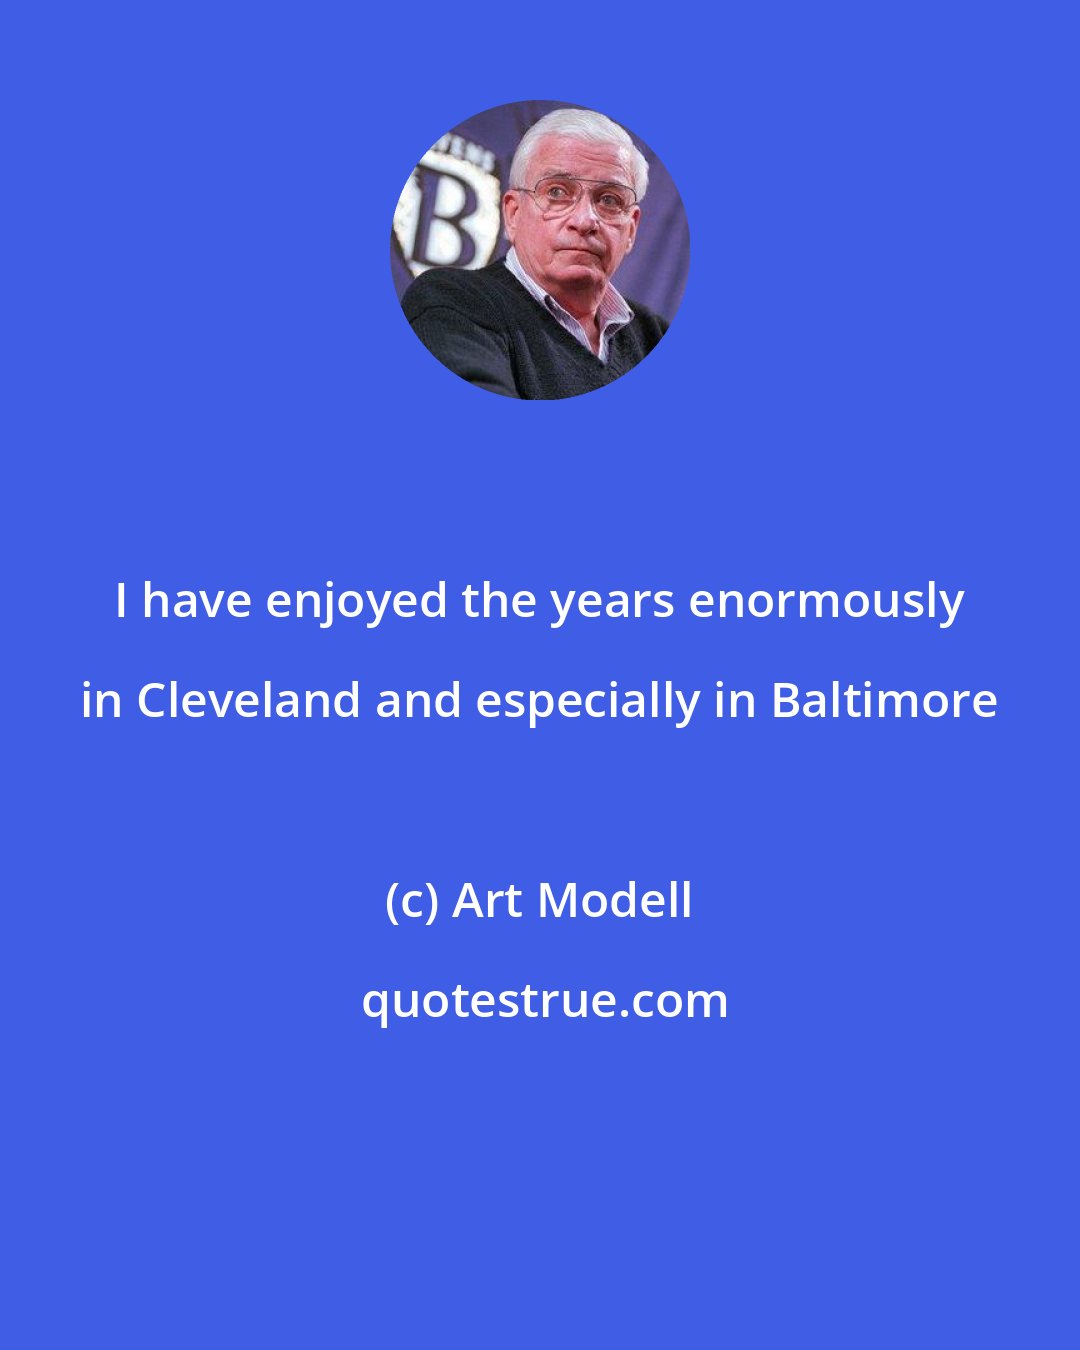 Art Modell: I have enjoyed the years enormously in Cleveland and especially in Baltimore